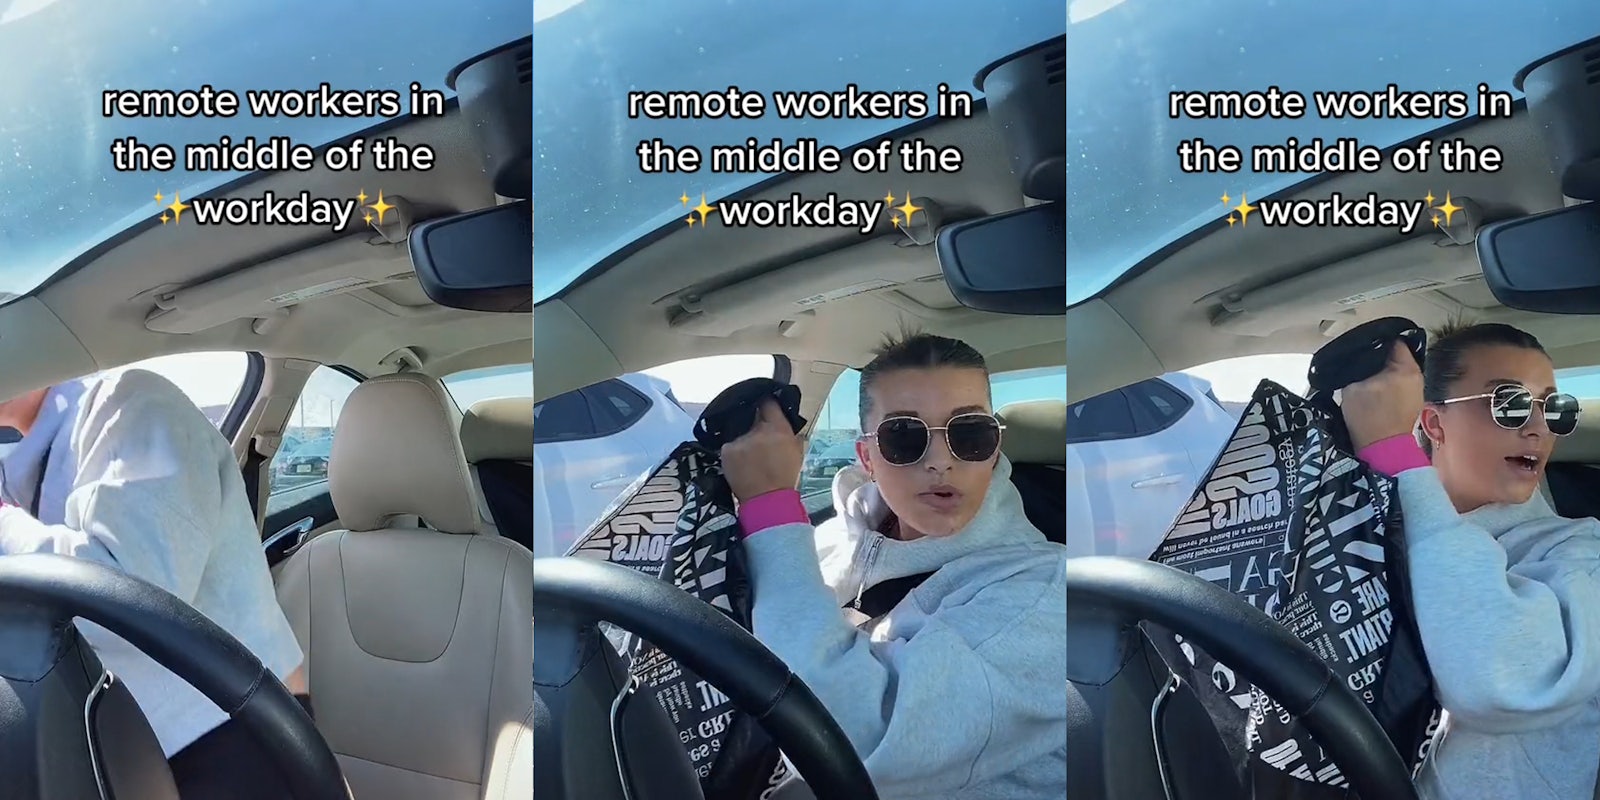 remote worker getting into car with caption 'remote workers in the middle of the day' (l) remote worker getting into car holding bag with caption 'remote workers in the middle of the day' (c) remote worker getting into car holding bag with caption 'remote workers in the middle of the day' (r)